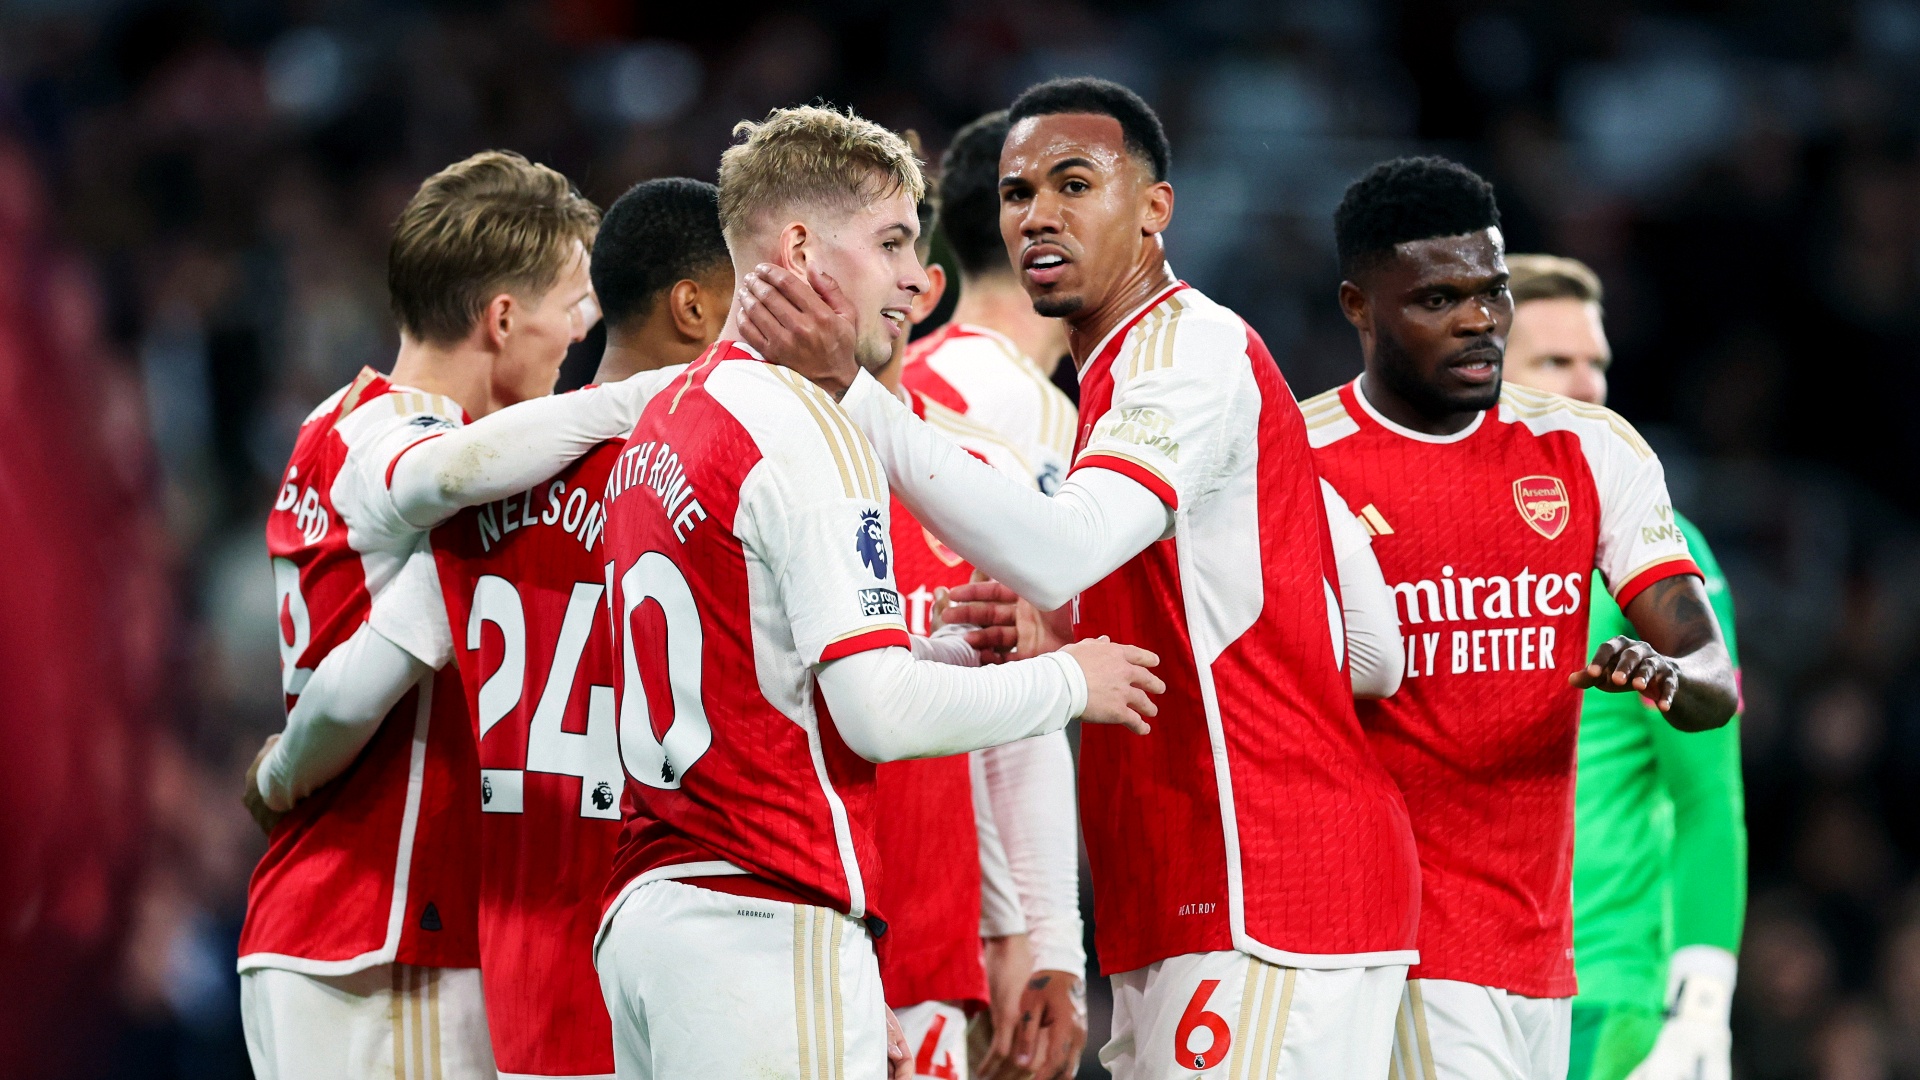 Paul Dickov praises Arsenal for one major characteristic in Premier League title chase